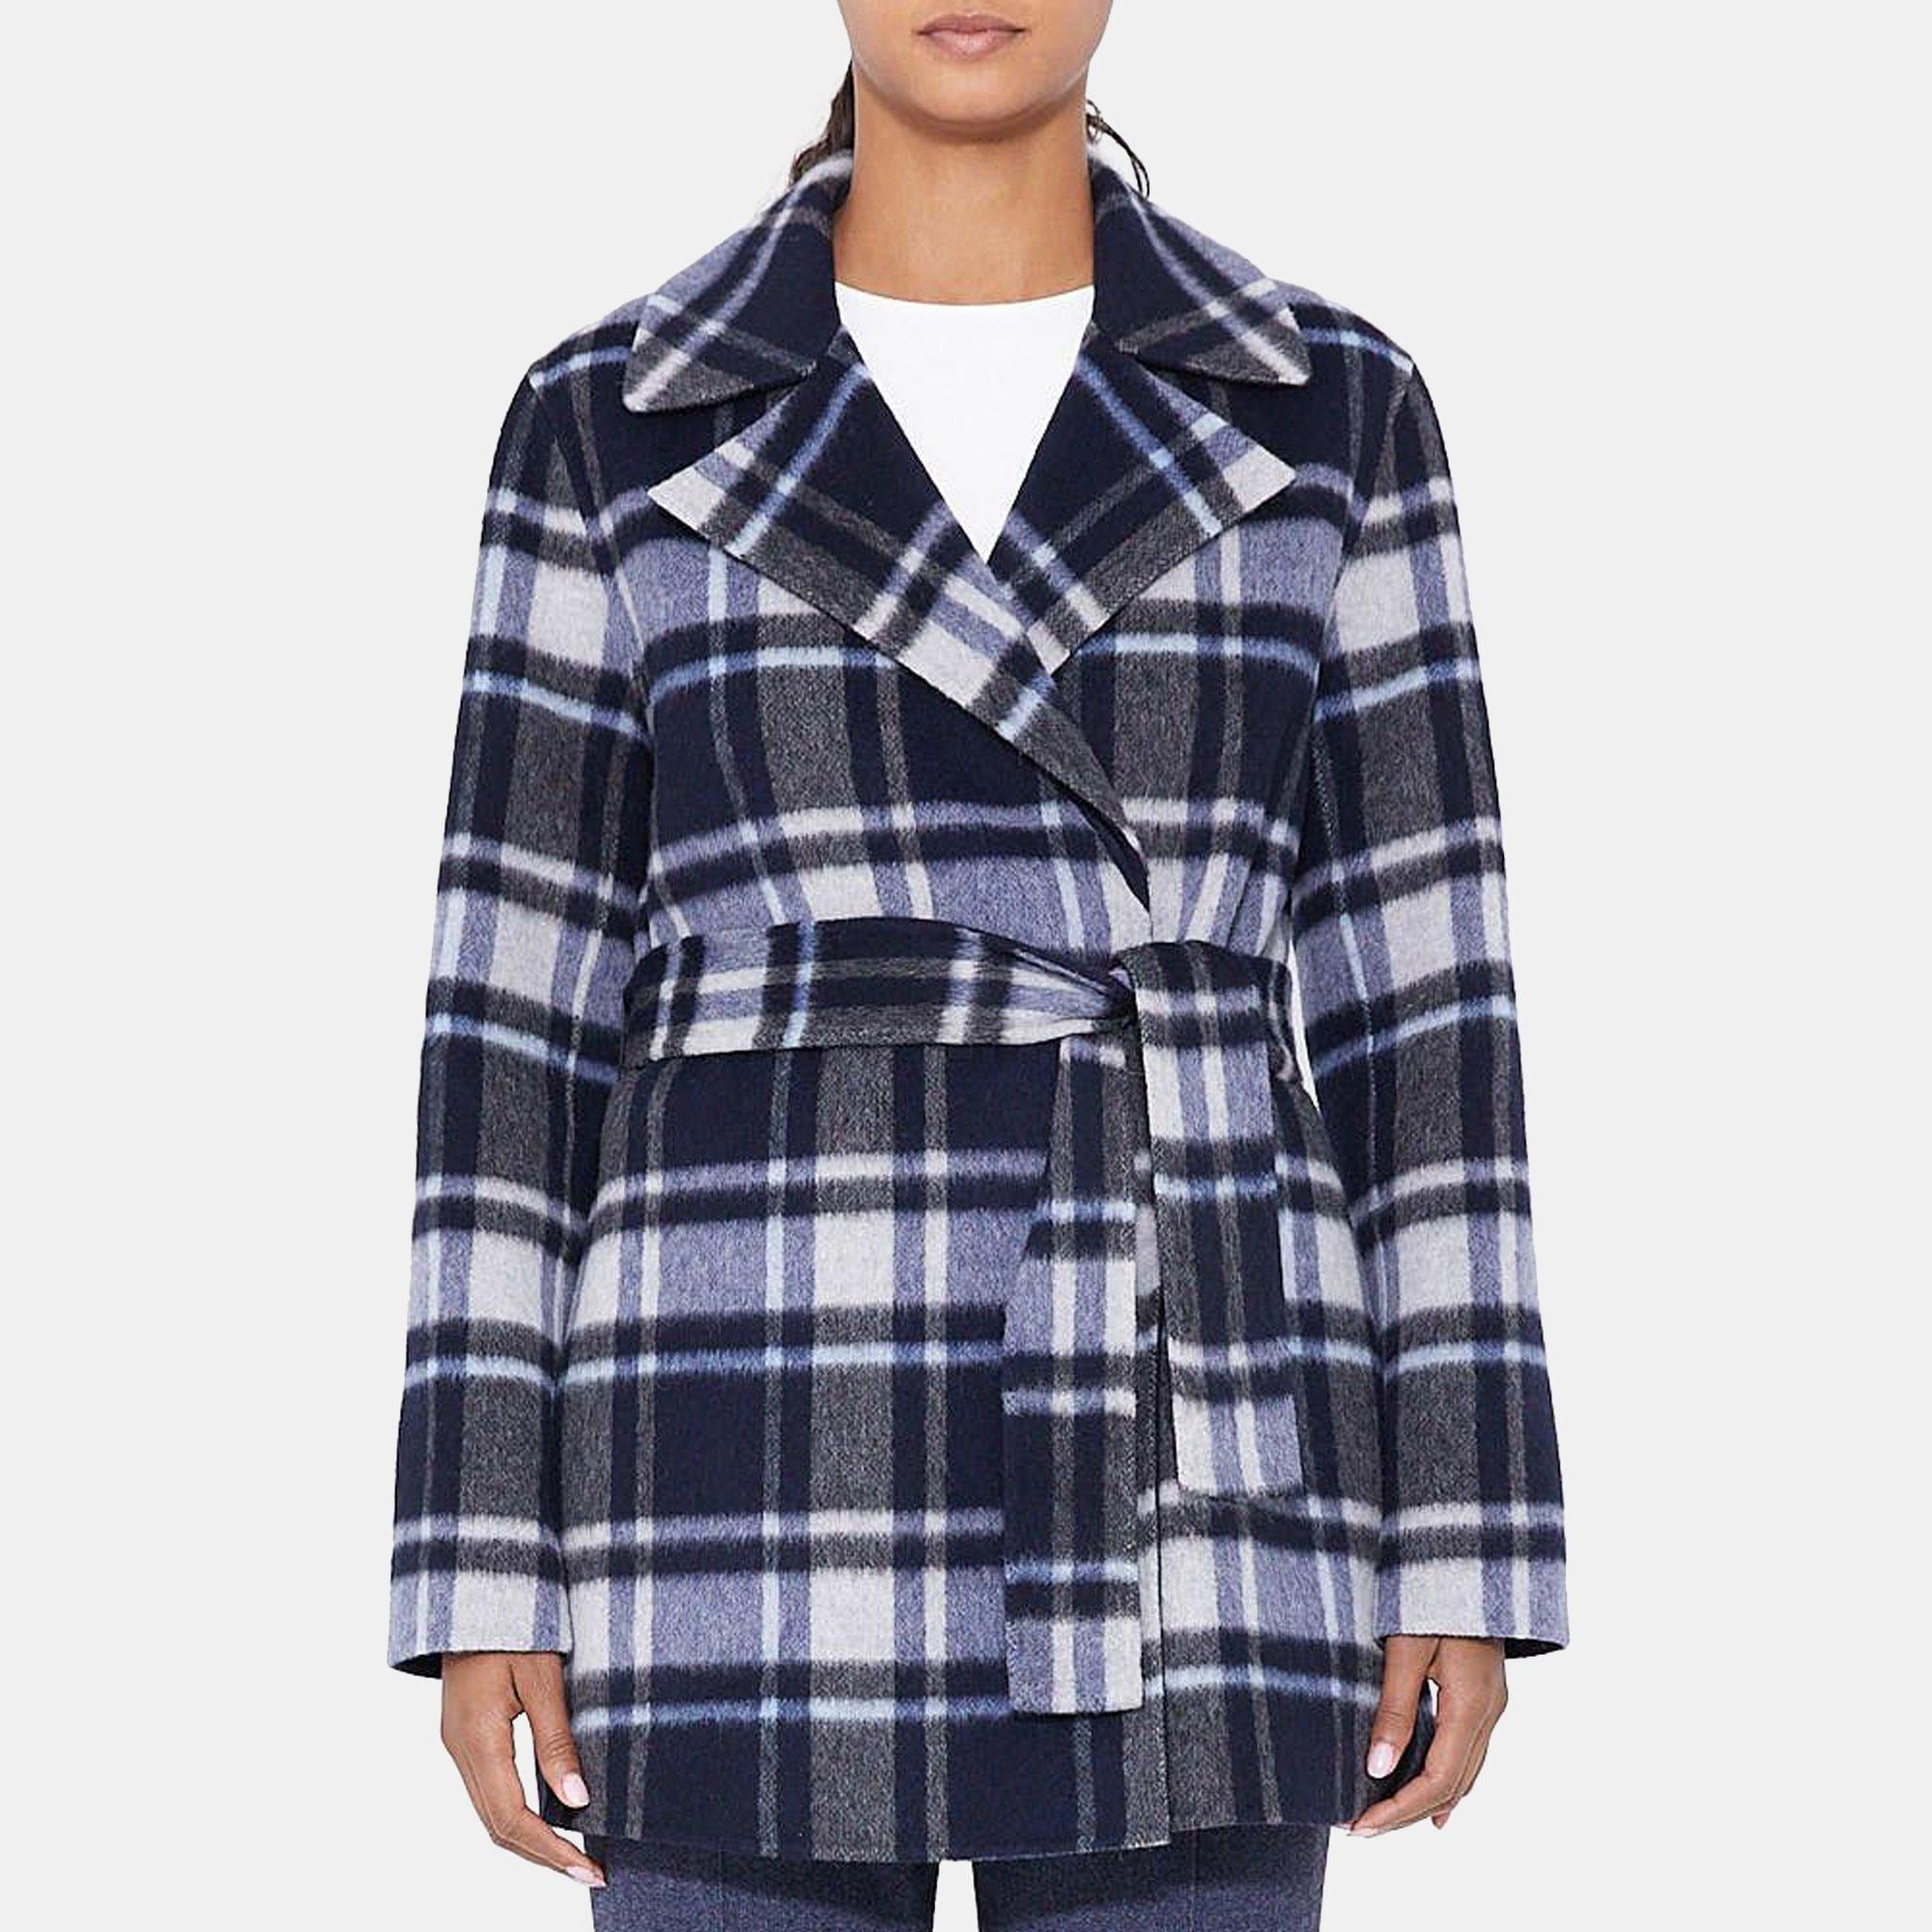 Theory Belted Wrap Coat in Plaid Wool-Blend